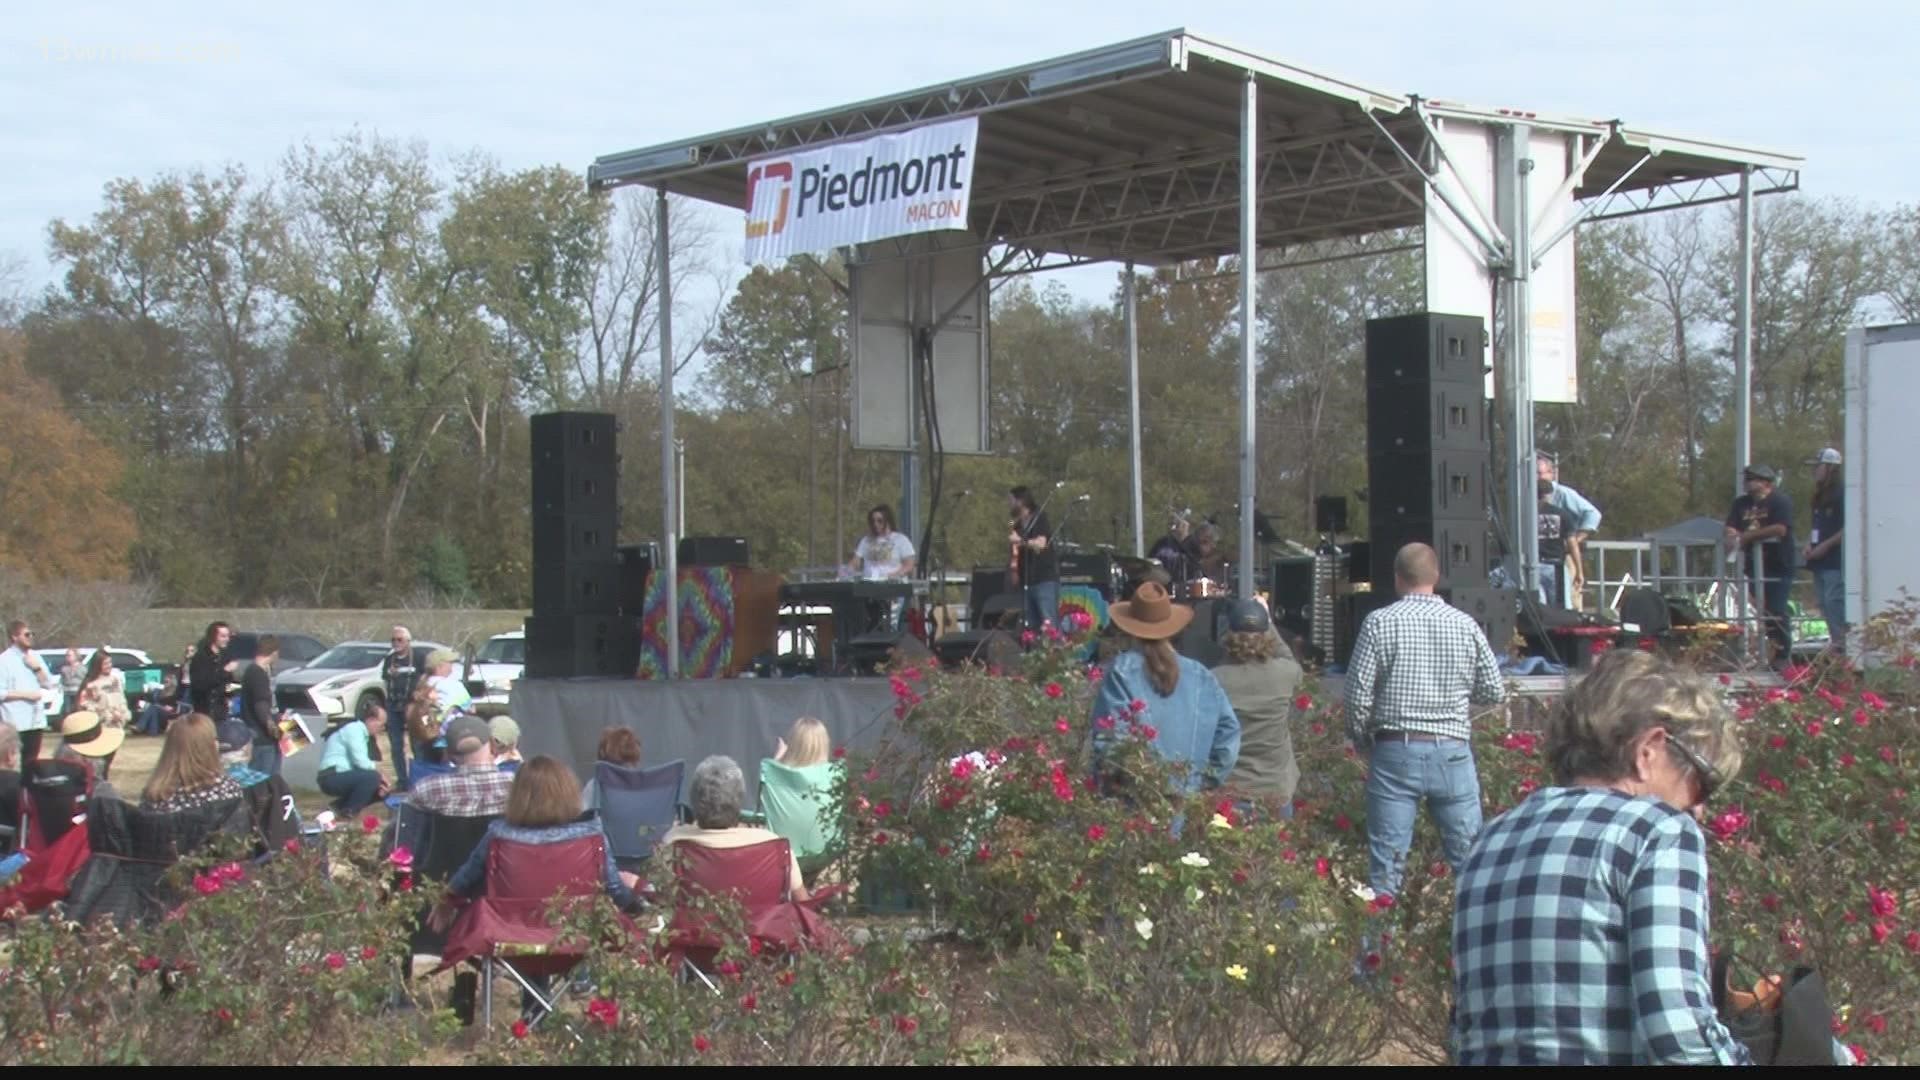 The annual event benefits the Daybreak Center in Macon.